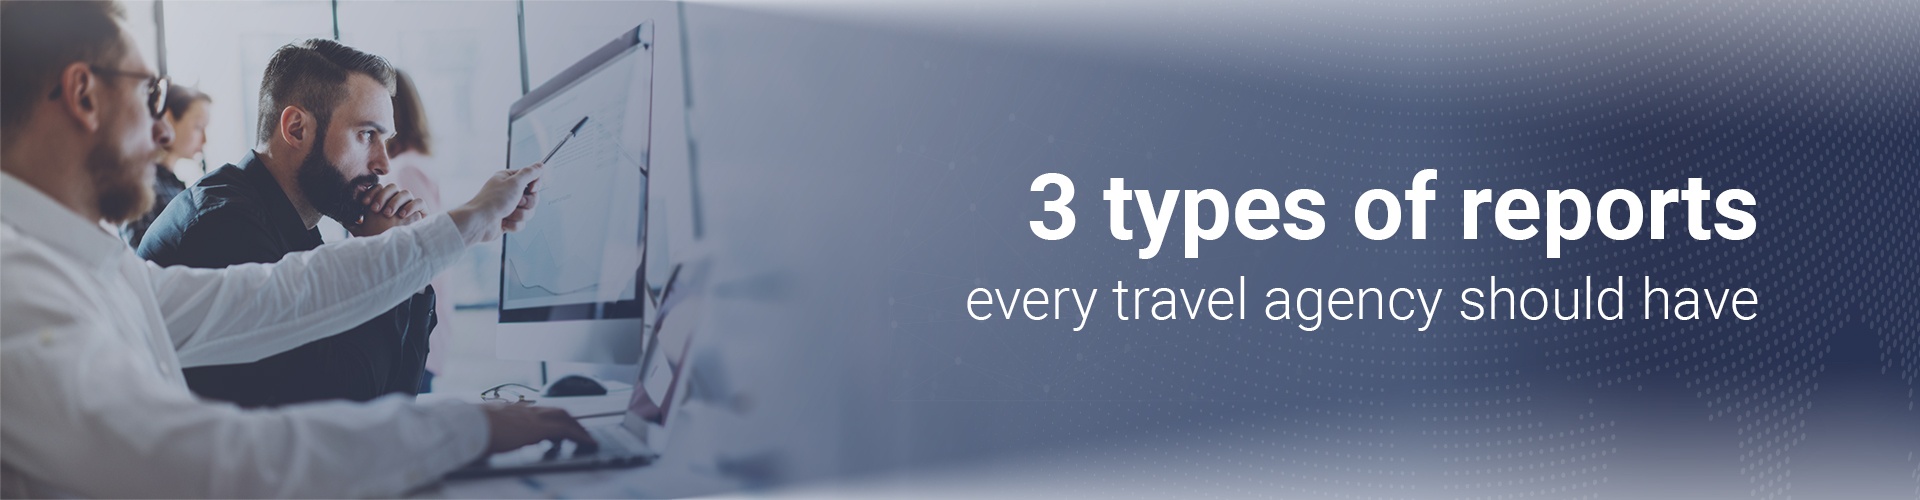 3 types of reports every travel agency should have